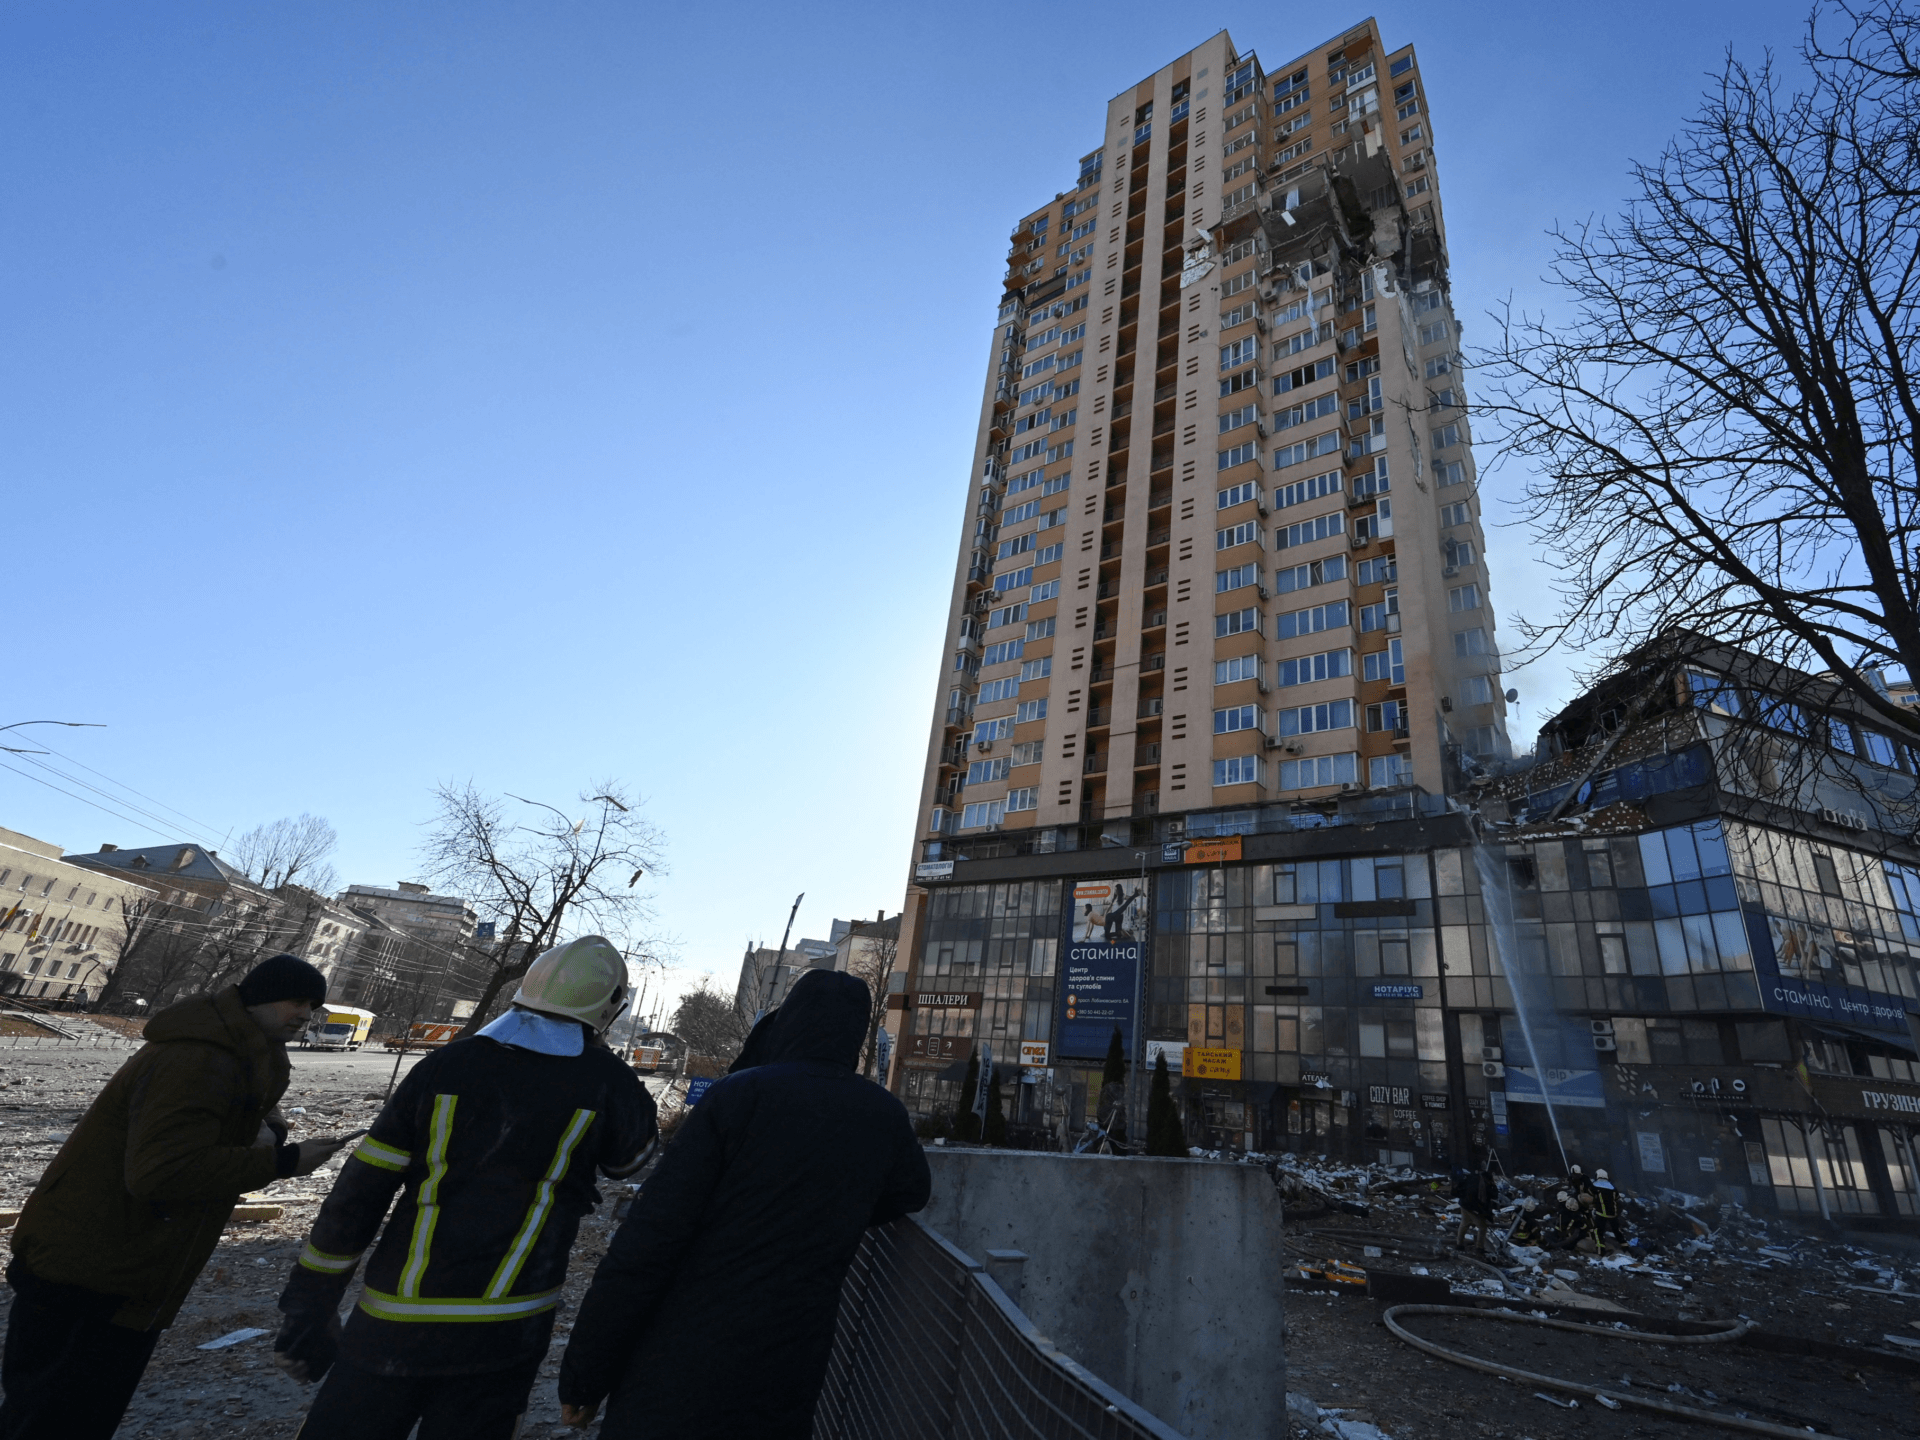 Firefighters extinguish fire in a high-rise apartment block which was hit by recent shelling in Kyiv on February 26, 2022. - Ukrainian soldiers repulsed a Russian attack in the capital, the military said on February 26 after a defiant President Volodymyr Zelensky vowed his pro-Western country would not be bowed by Moscow. It started the third day since Russian leader Vladimir Putin unleashed a full-scale invasion that has killed dozens of people, forced more than 50,000 to flee Ukraine in just 48 hours and sparked fears of a wider conflict in Europe. (Photo by GENYA SAVILOV / AFP) (Photo by GENYA SAVILOV/AFP via Getty Images)